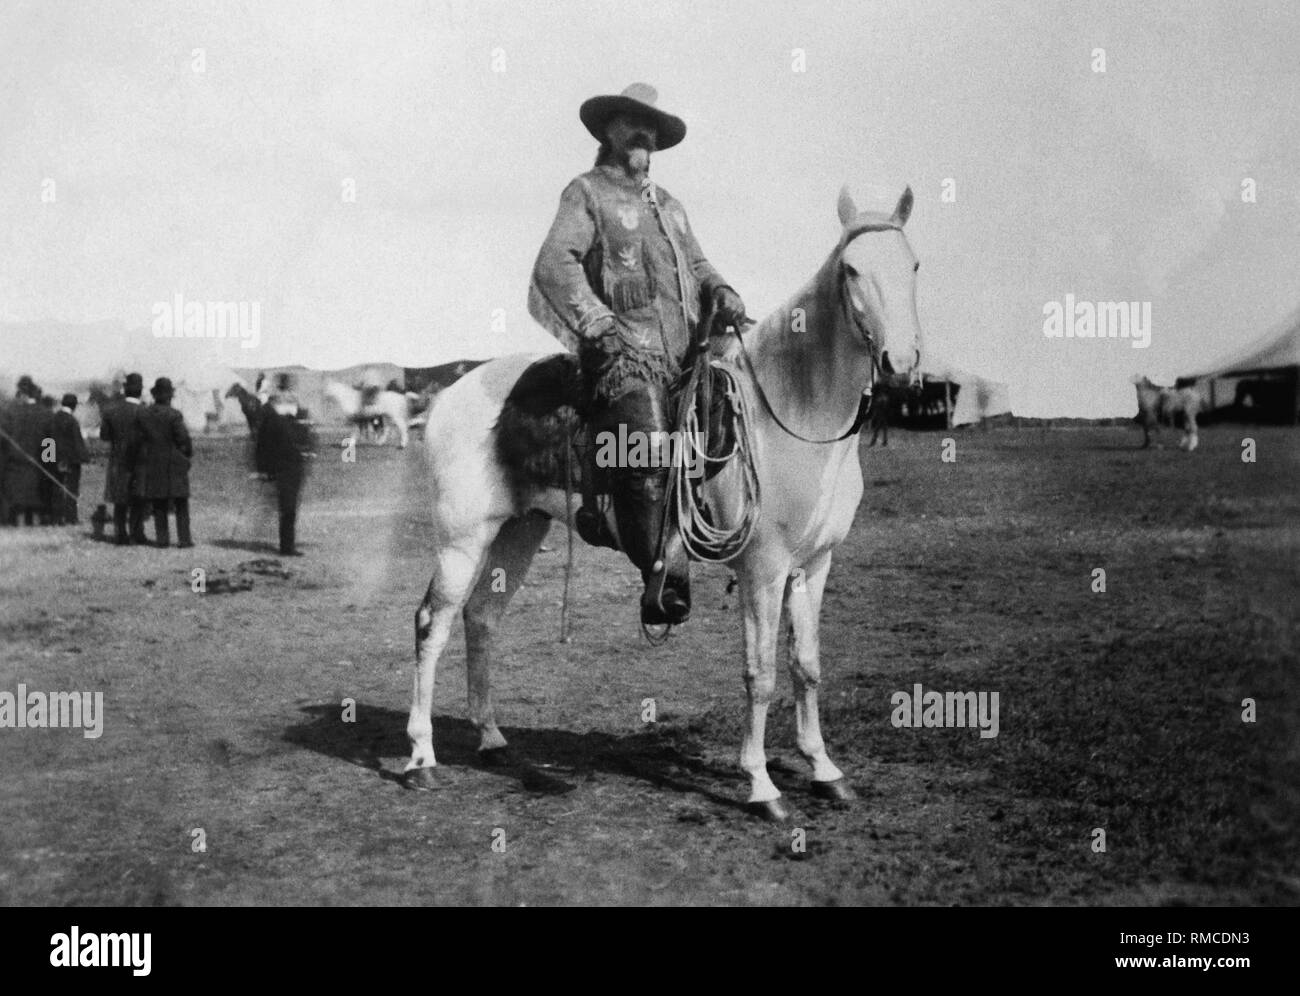 Buffalo Bill, real name William Frederick Cody (1846-1917), American scout in the Indian wars. he brought the first Wild West show to Europe. On the picture (around 1892) he is